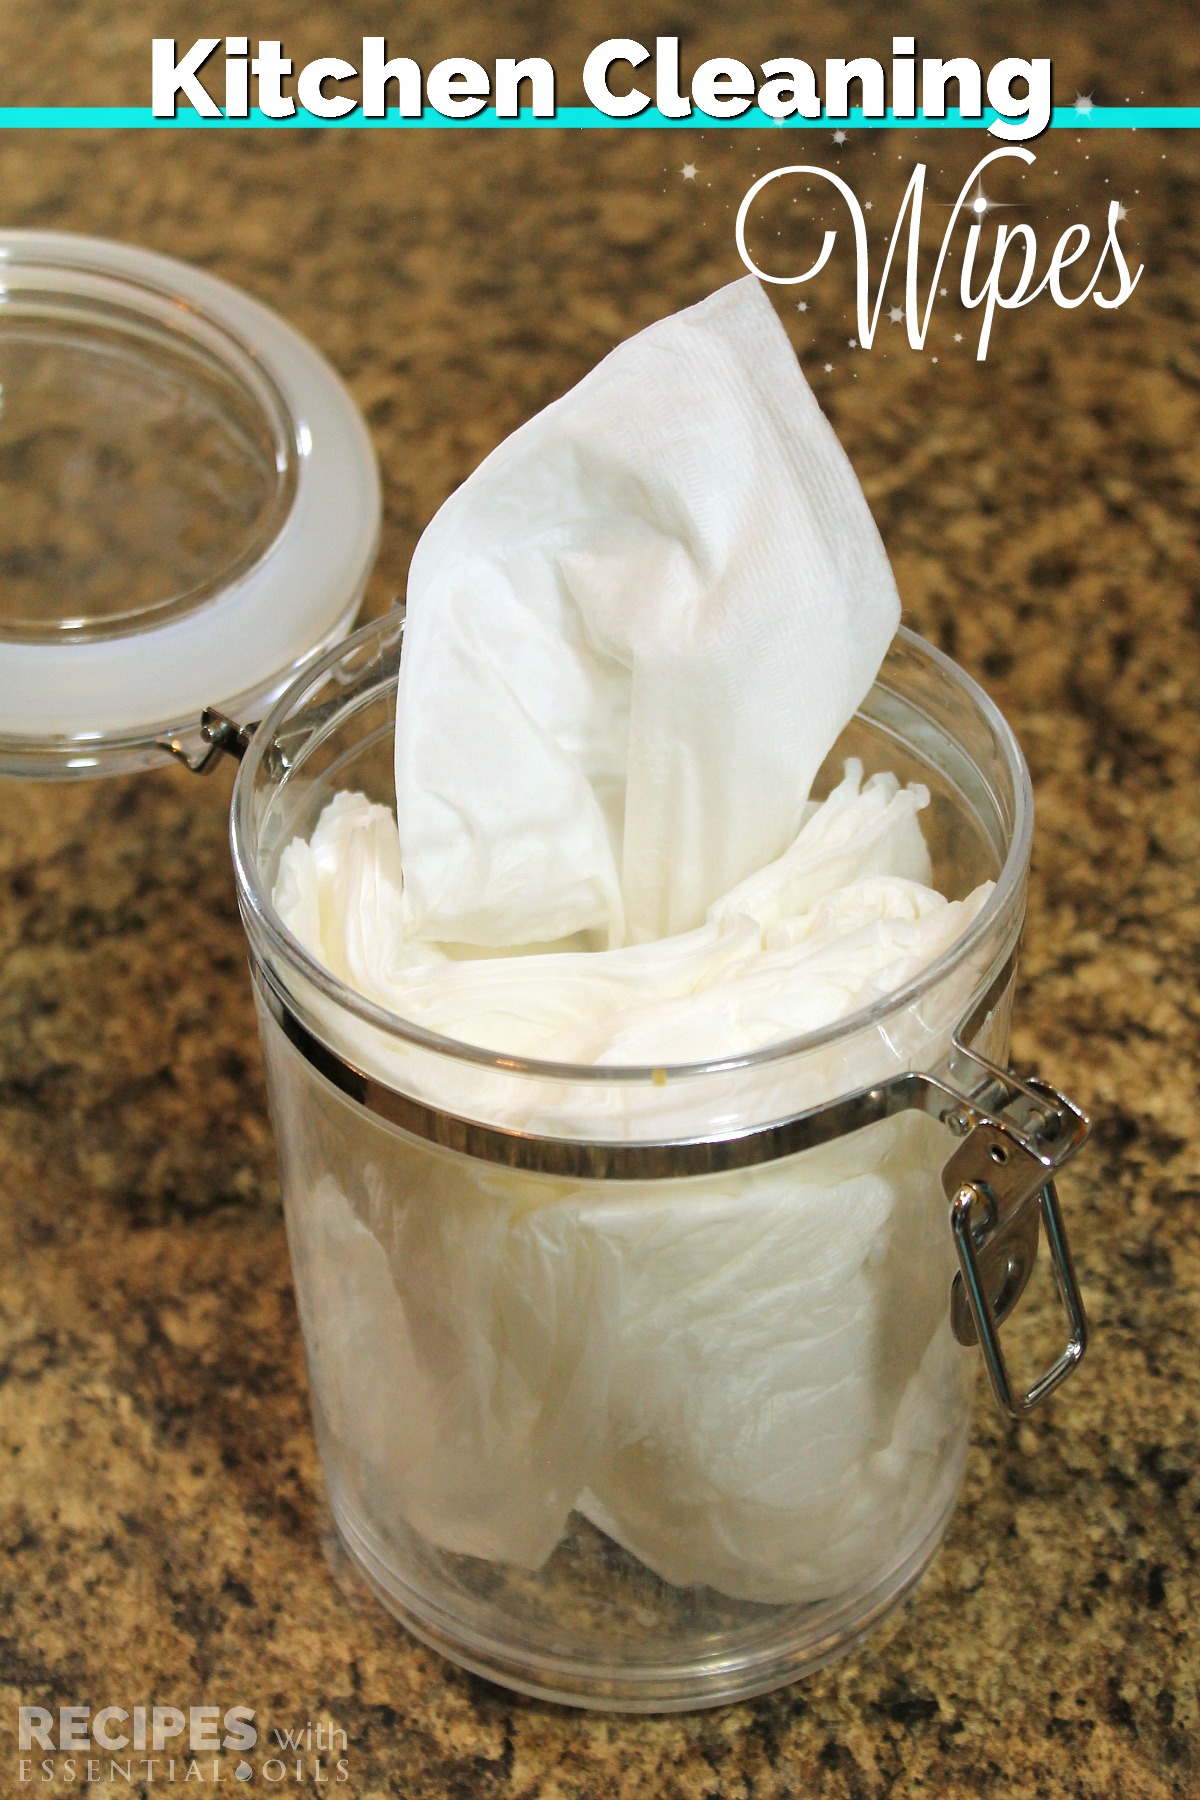 DIY Kitchen Cleaning Wipes - Recipes with Essential Oils